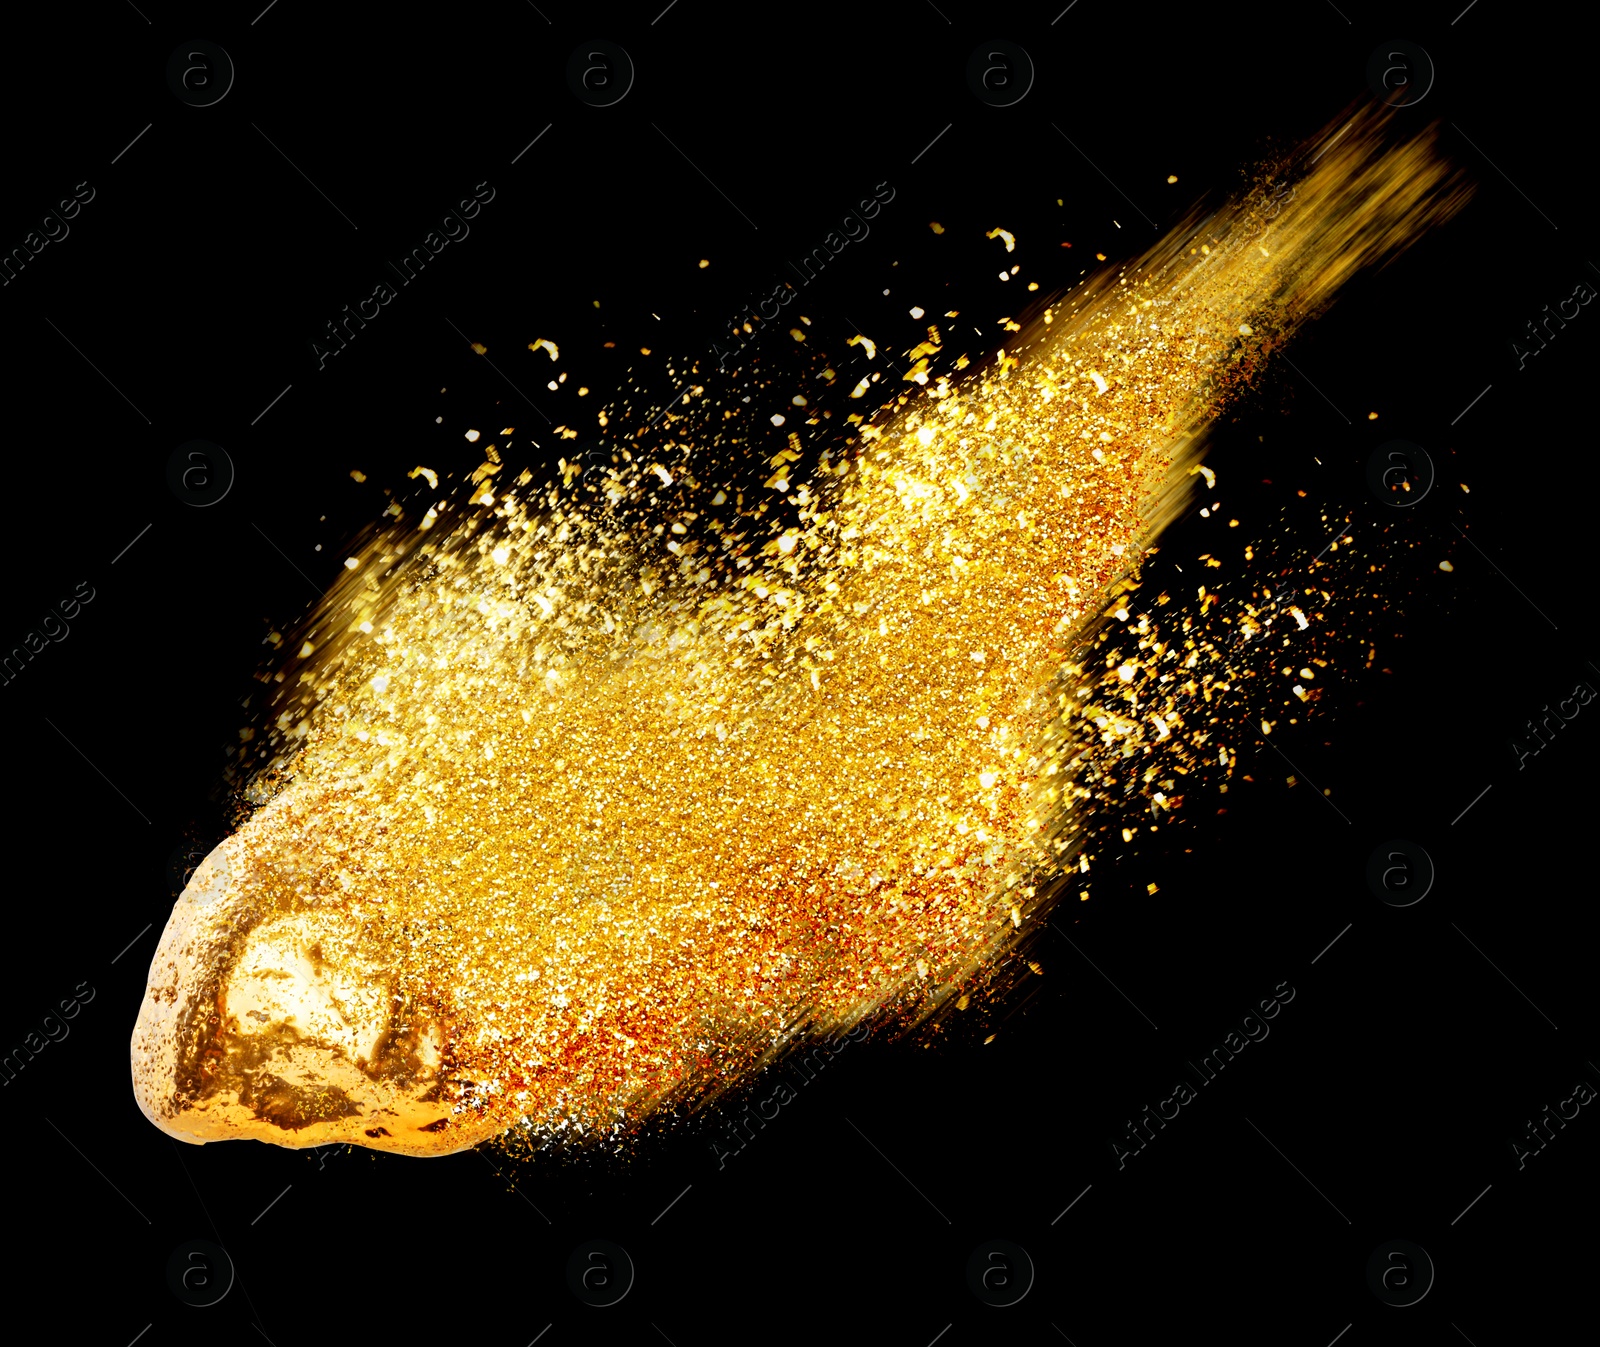 Image of Gold nugget and shiny glitter as comet on black background